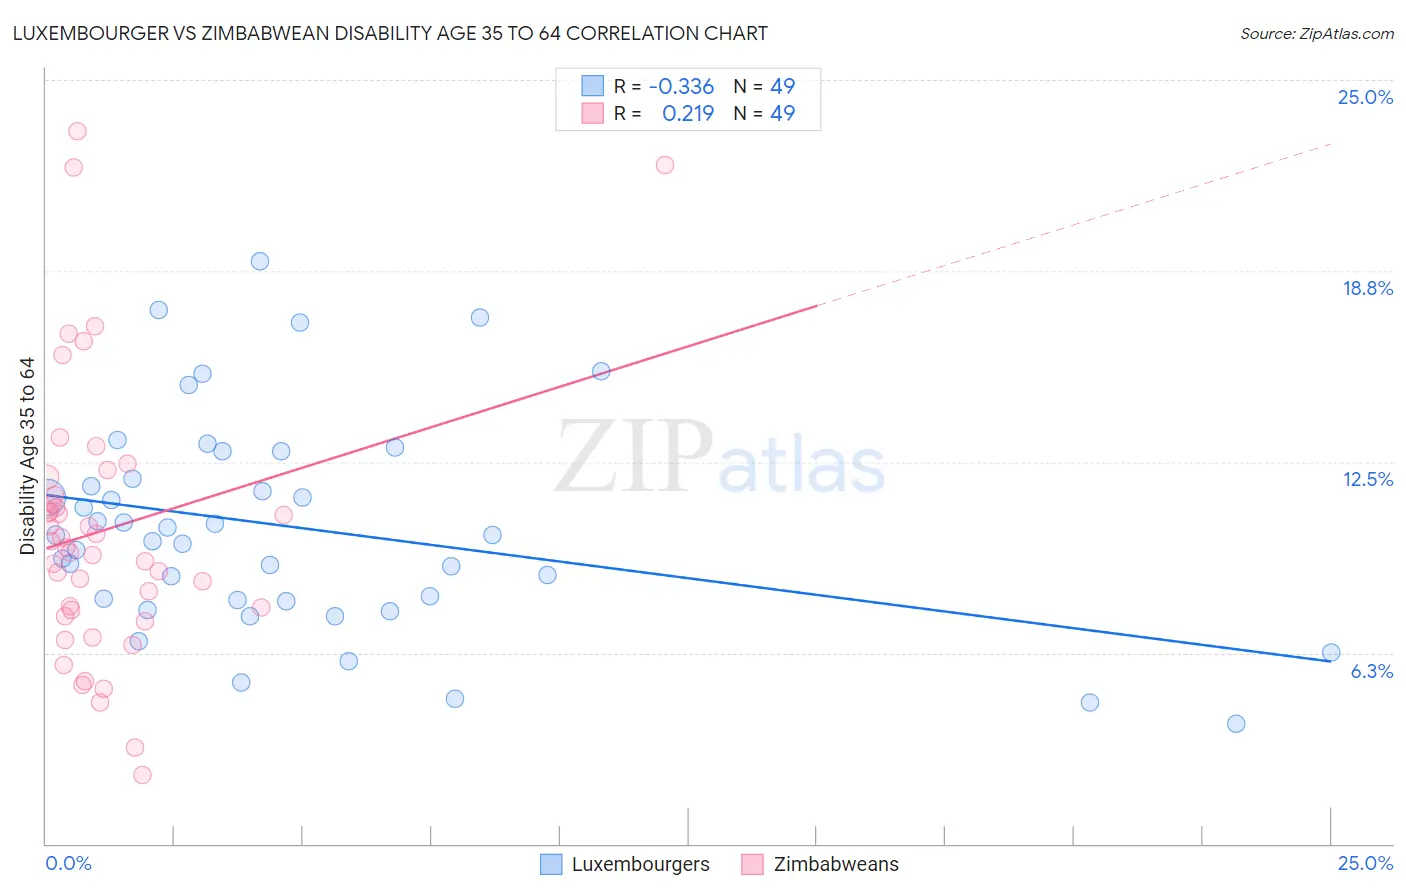 Luxembourger vs Zimbabwean Disability Age 35 to 64